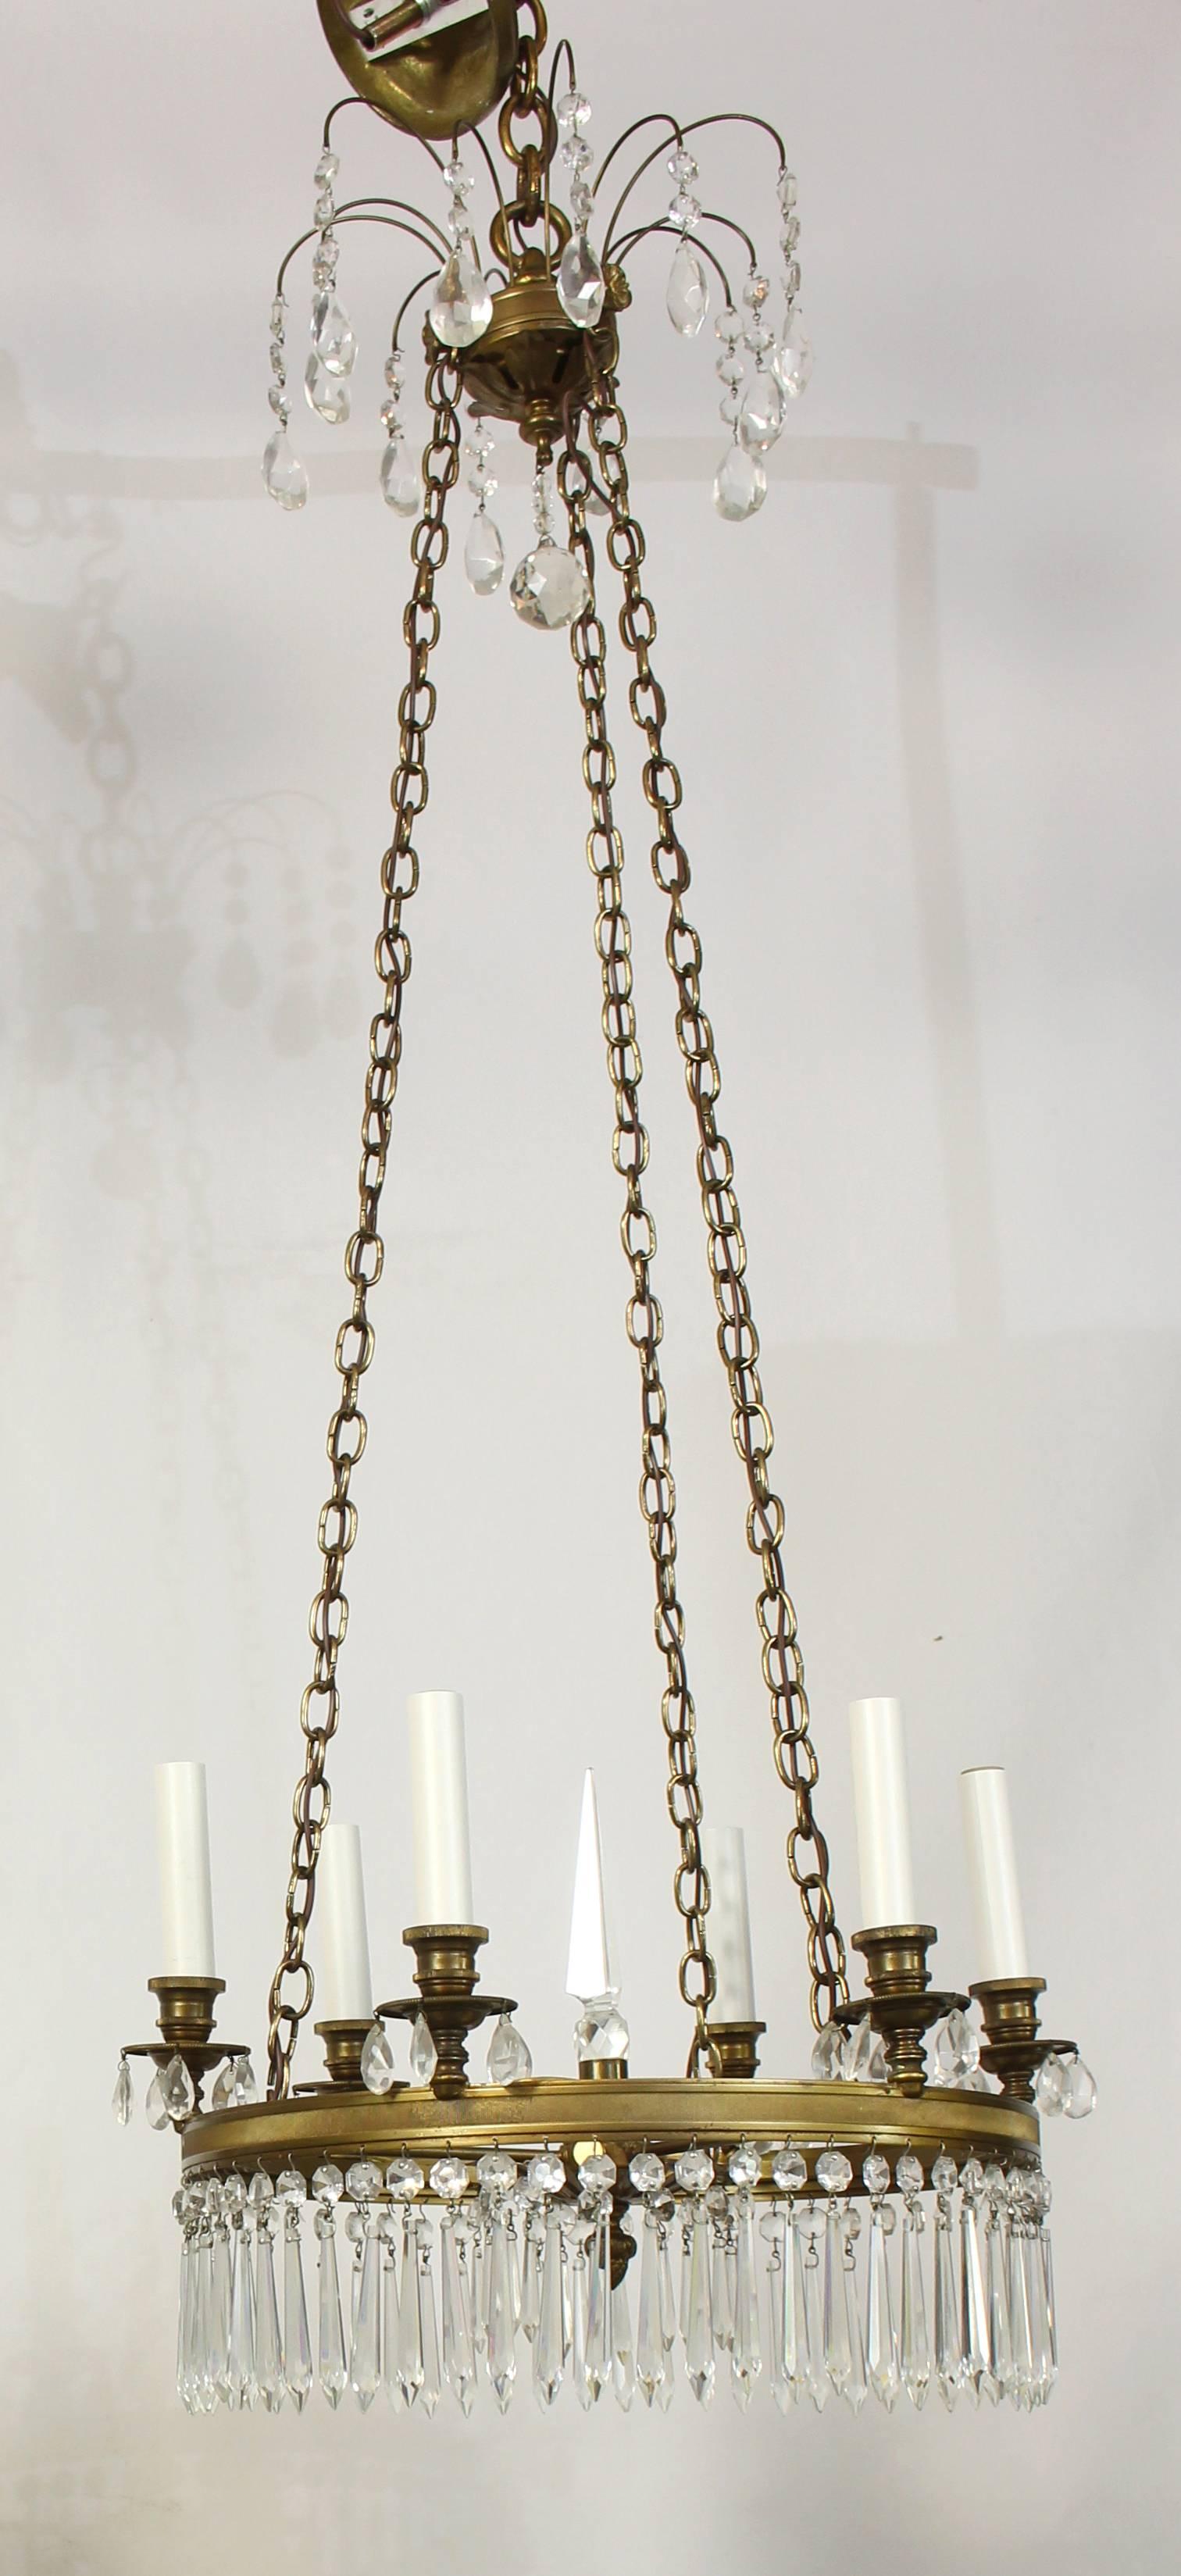 An elegant brass and crystal Regency style six light chandelier dating from the early 1960s. The three chains can be shortened to adjust the overall length of the light.